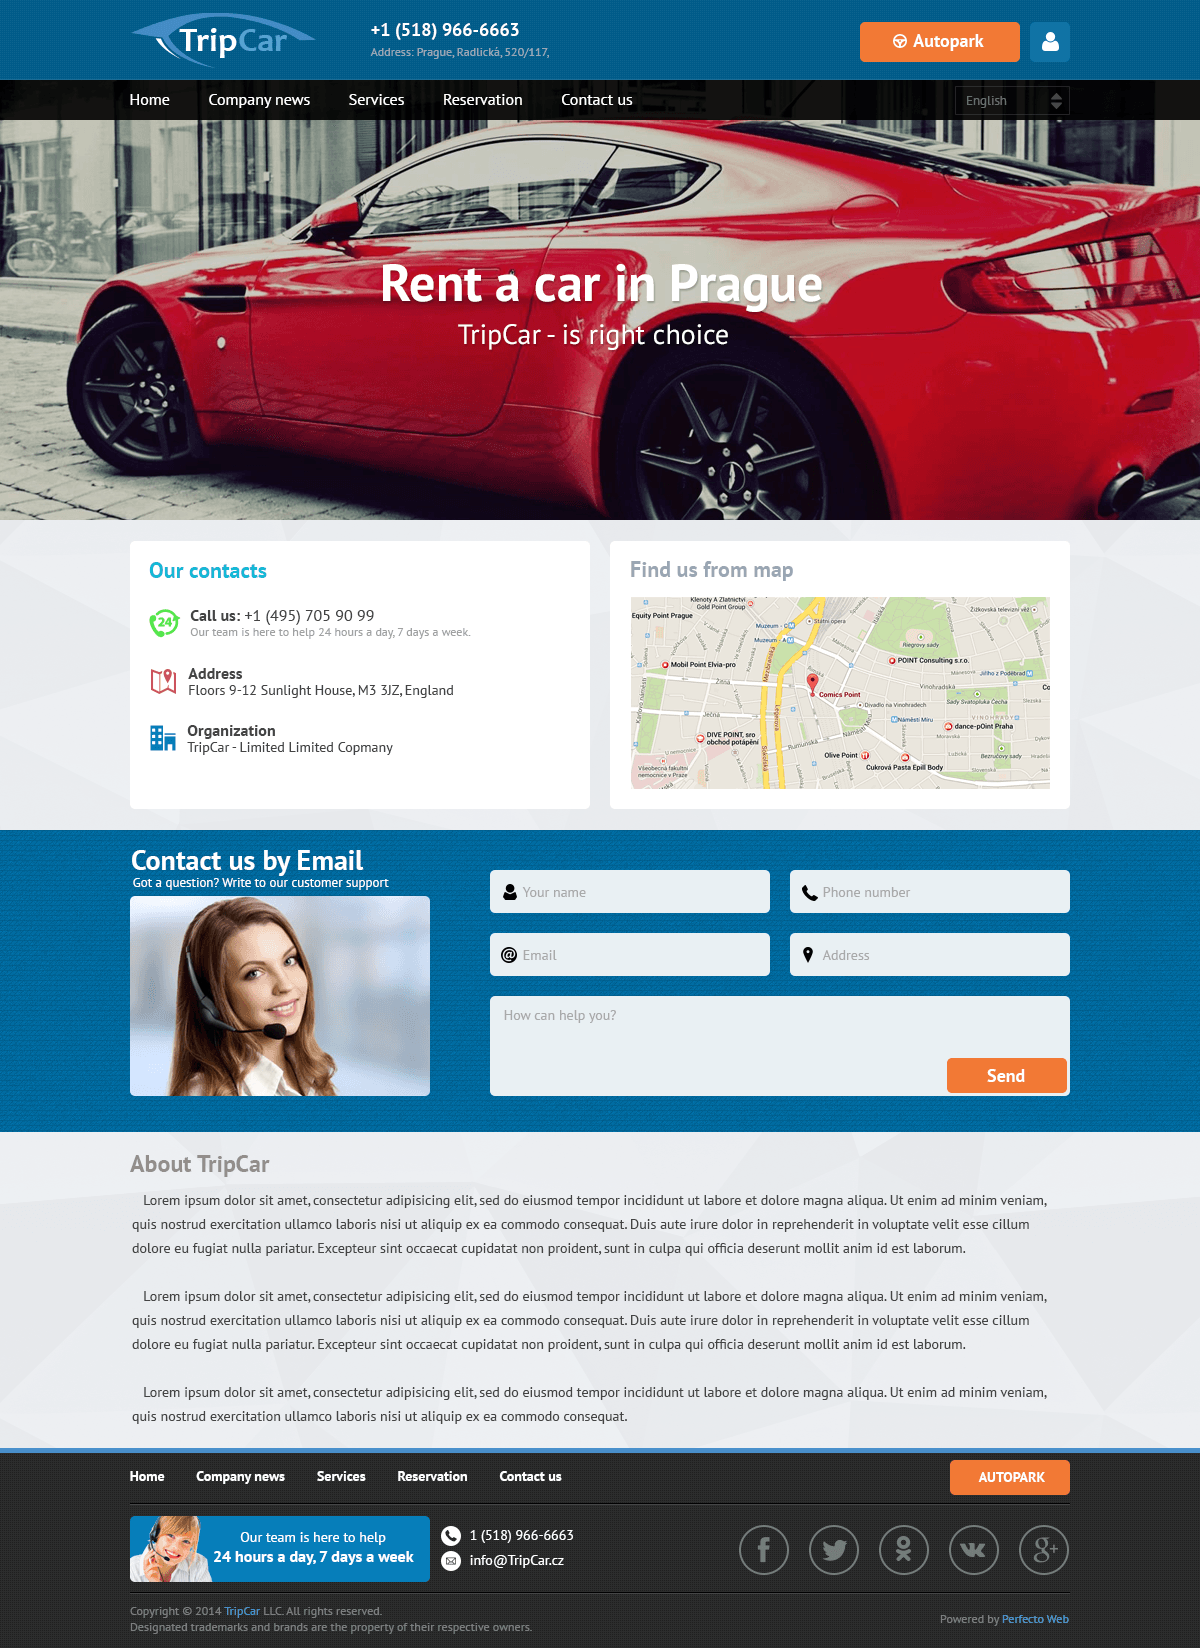 TripCar - Rent a car in Prague №4- Contacts and Feedback